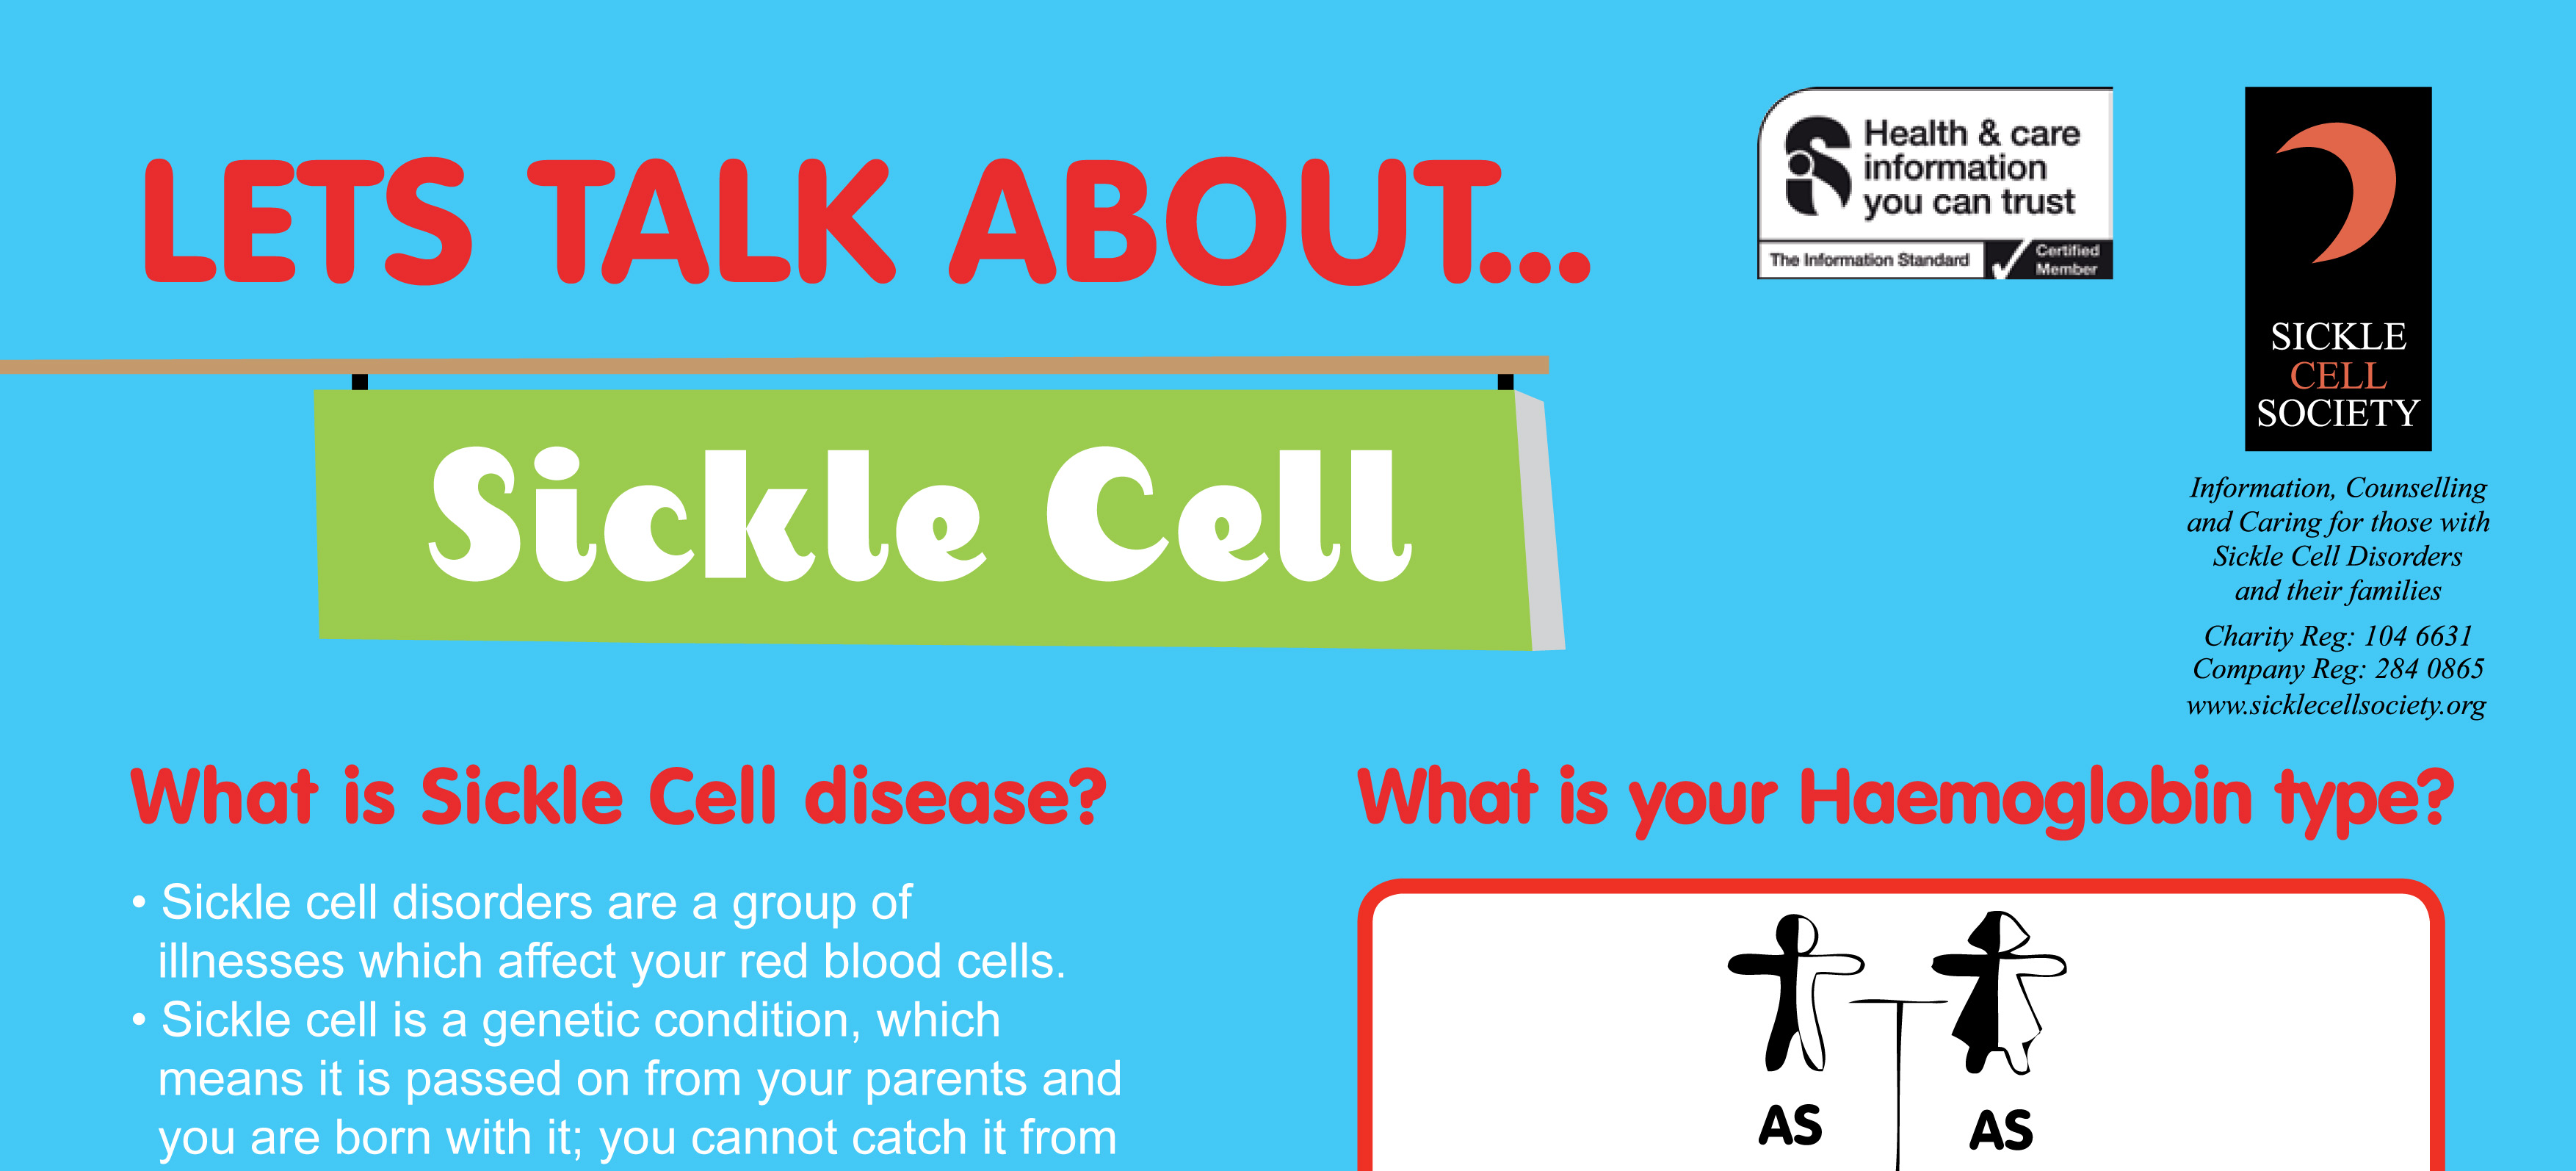 Let’s Talk About Sickle Cell sickle cell awareness poster » Sickle